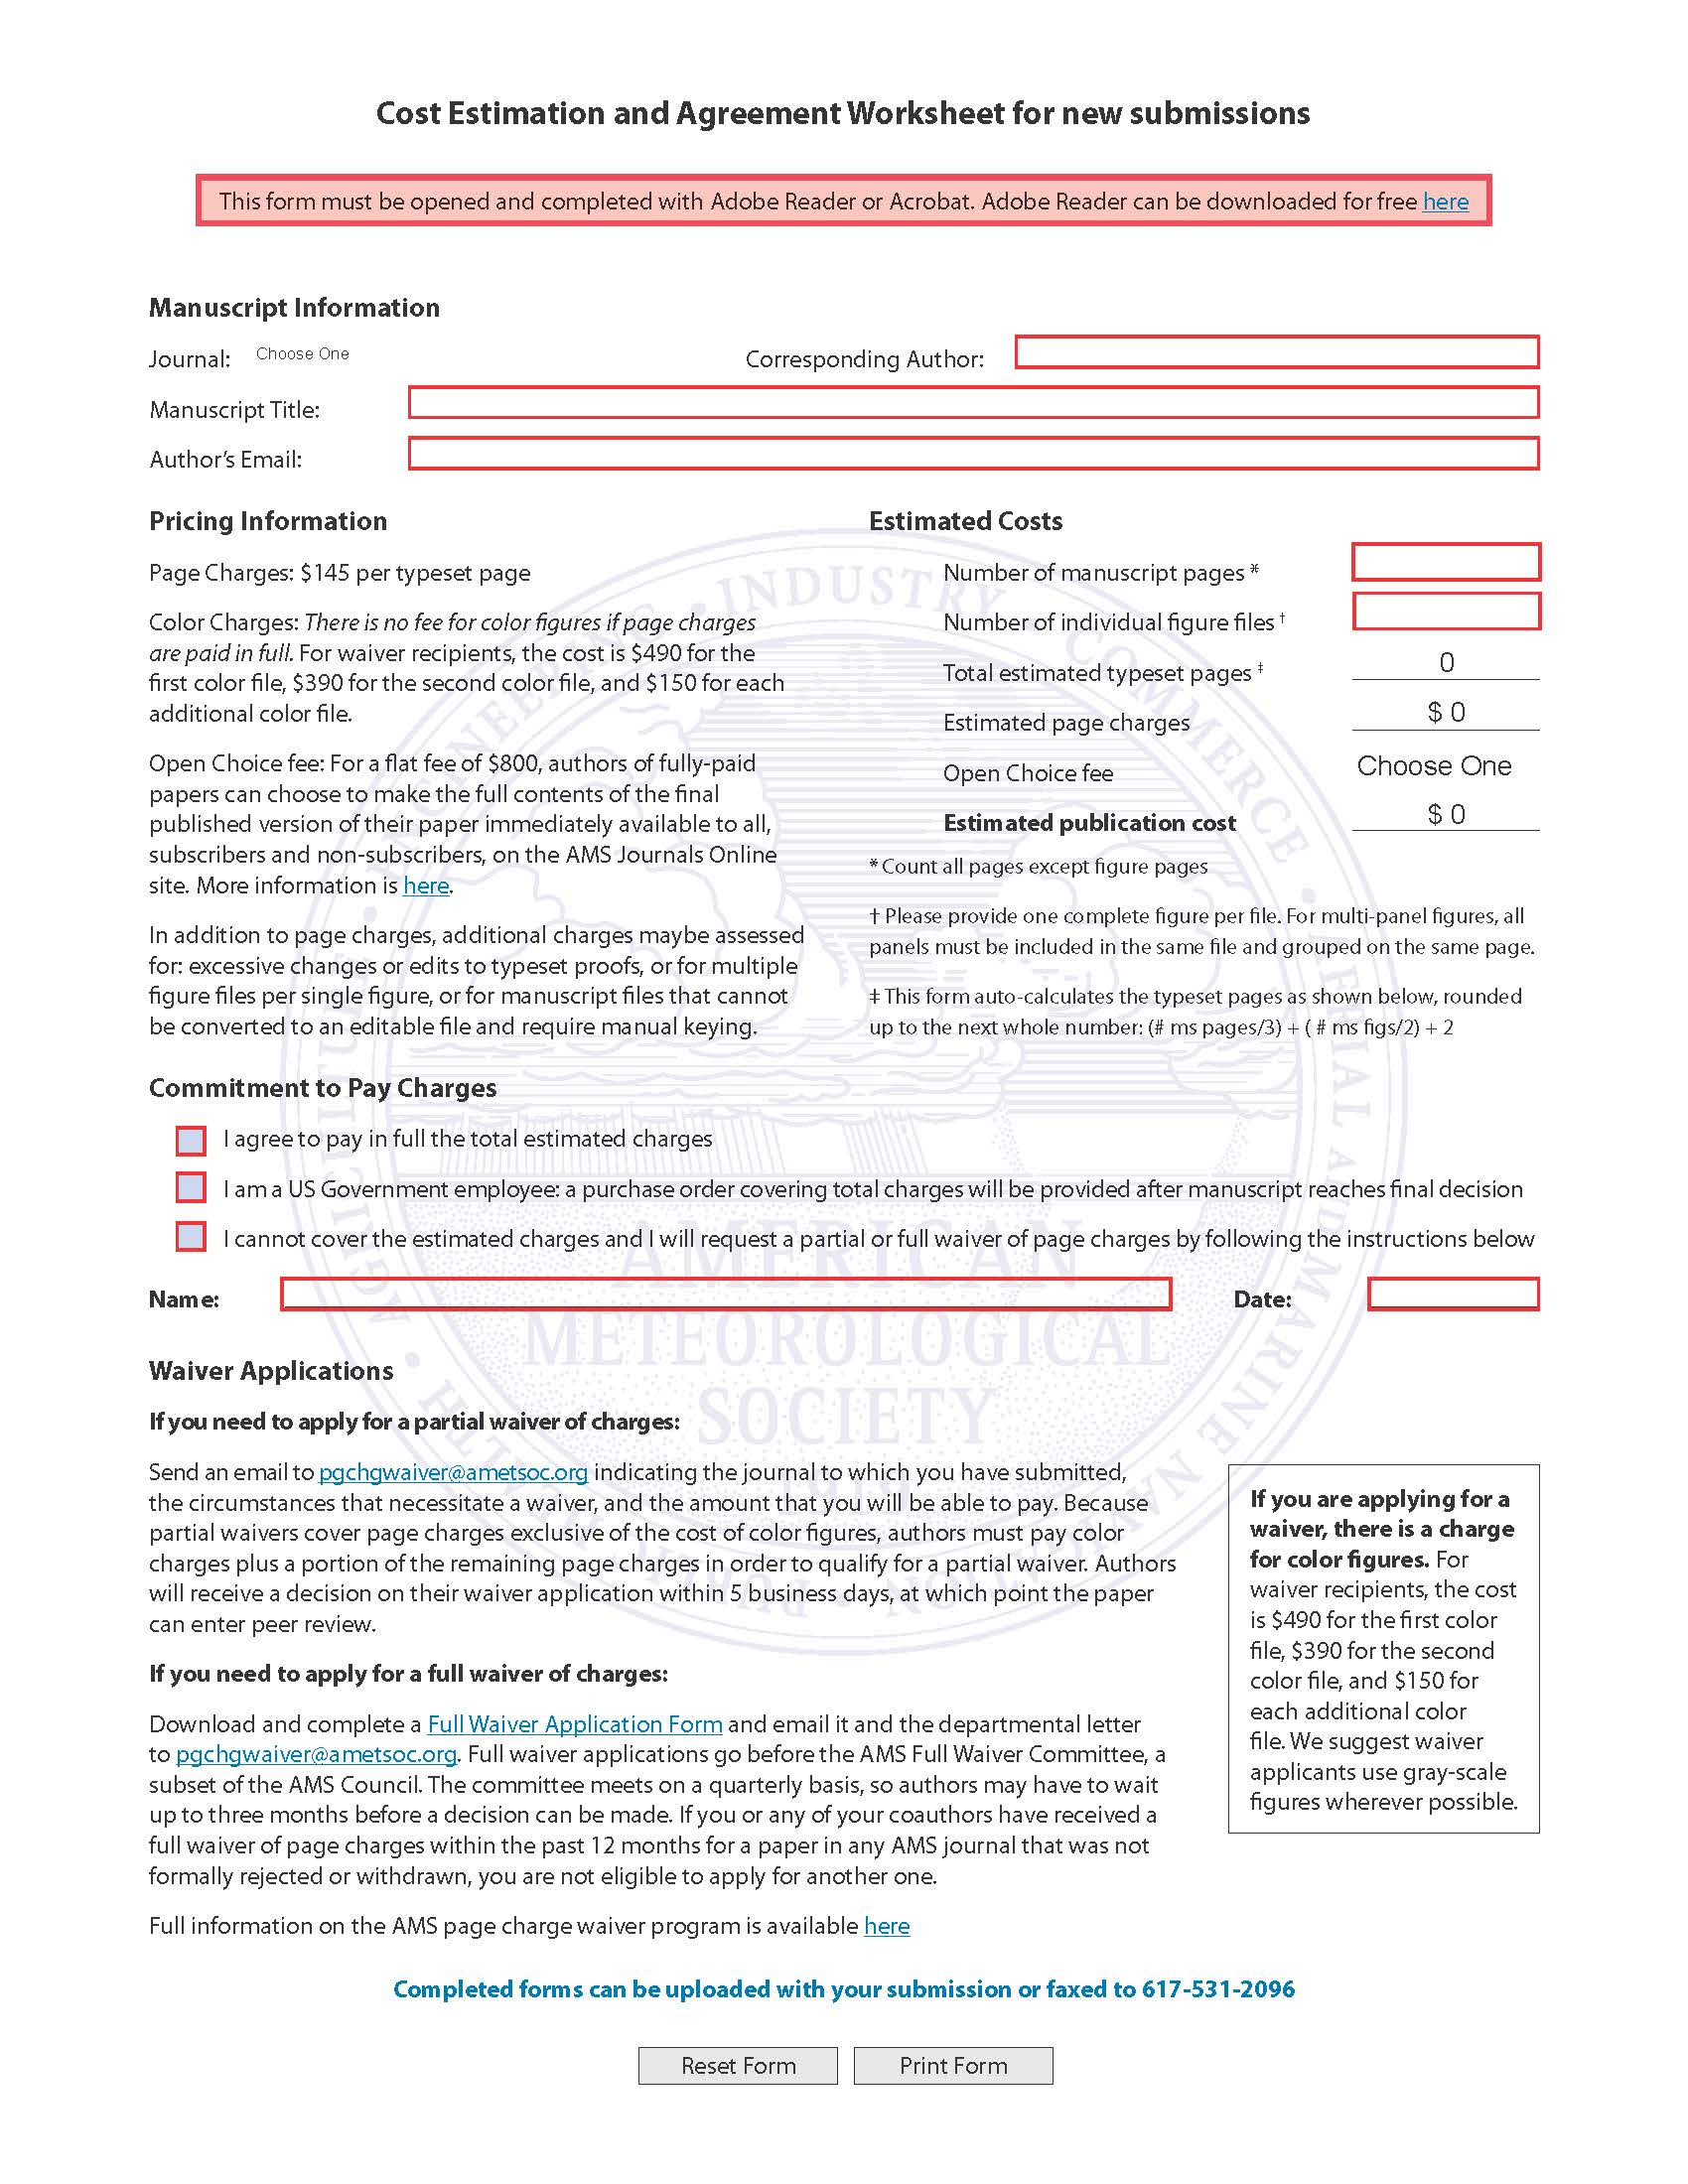 Download the New Submission Format Cost Estimation and Agreement Worksheet as a PDF